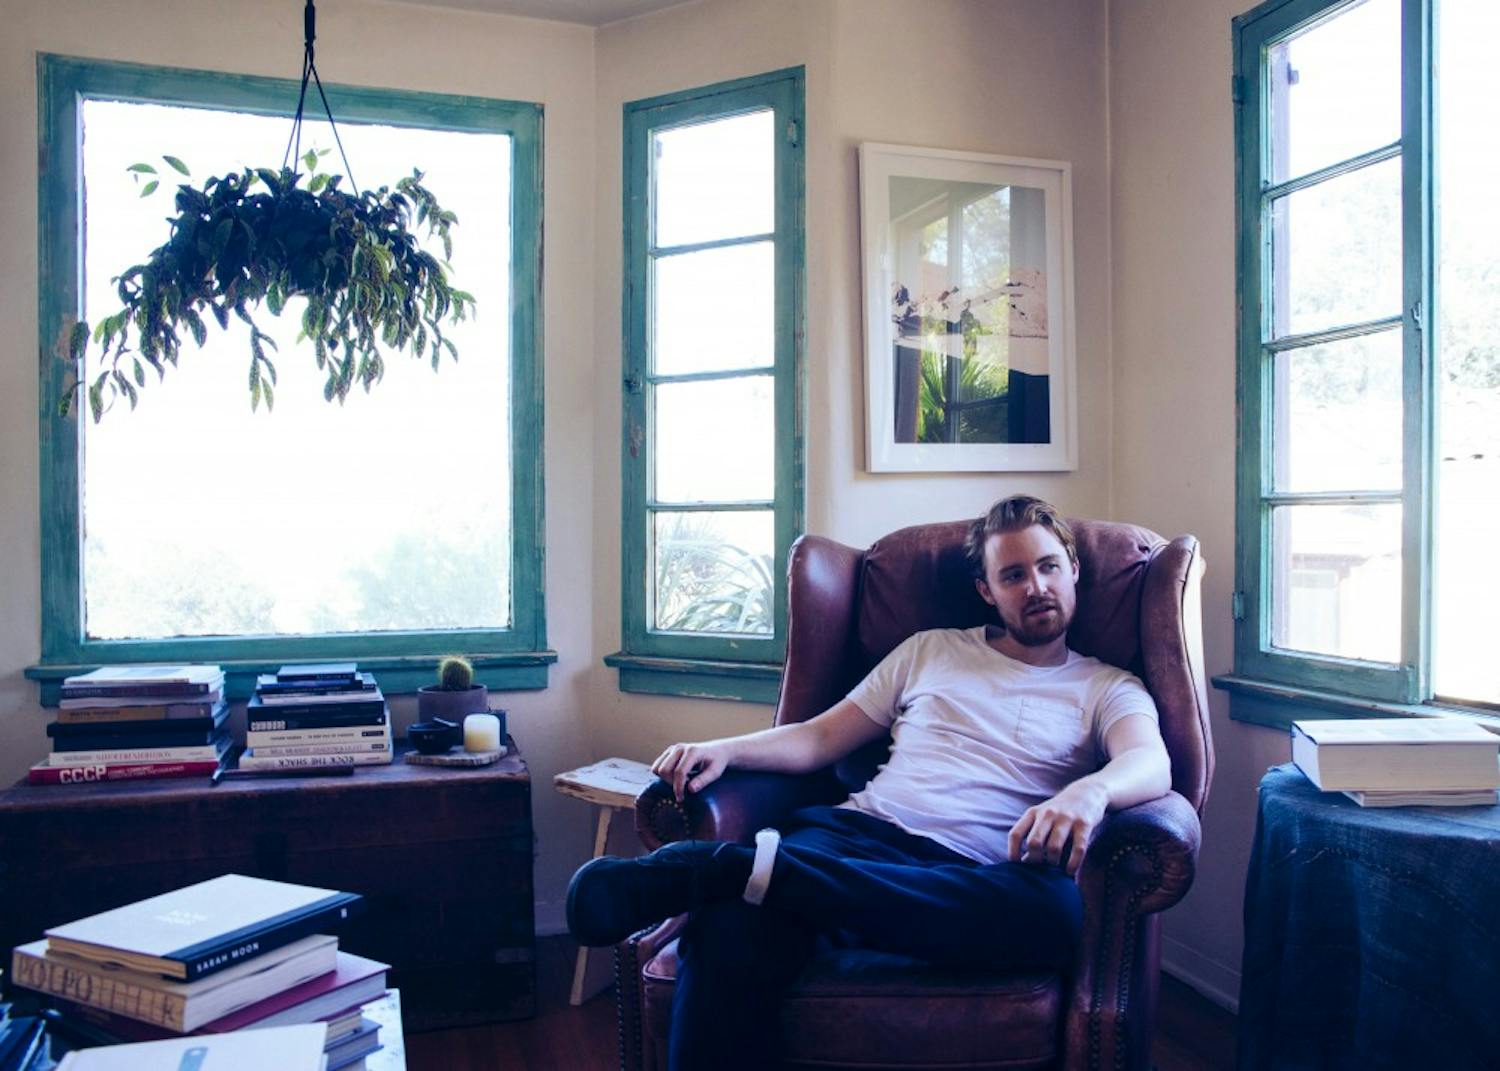 L.A. musician Ethan Gruska released his album "Slowmotionary" this year. Gruska will open for Ray LaMontagne on Nov. 4 at 8 p.m. at the IU Auditorium.